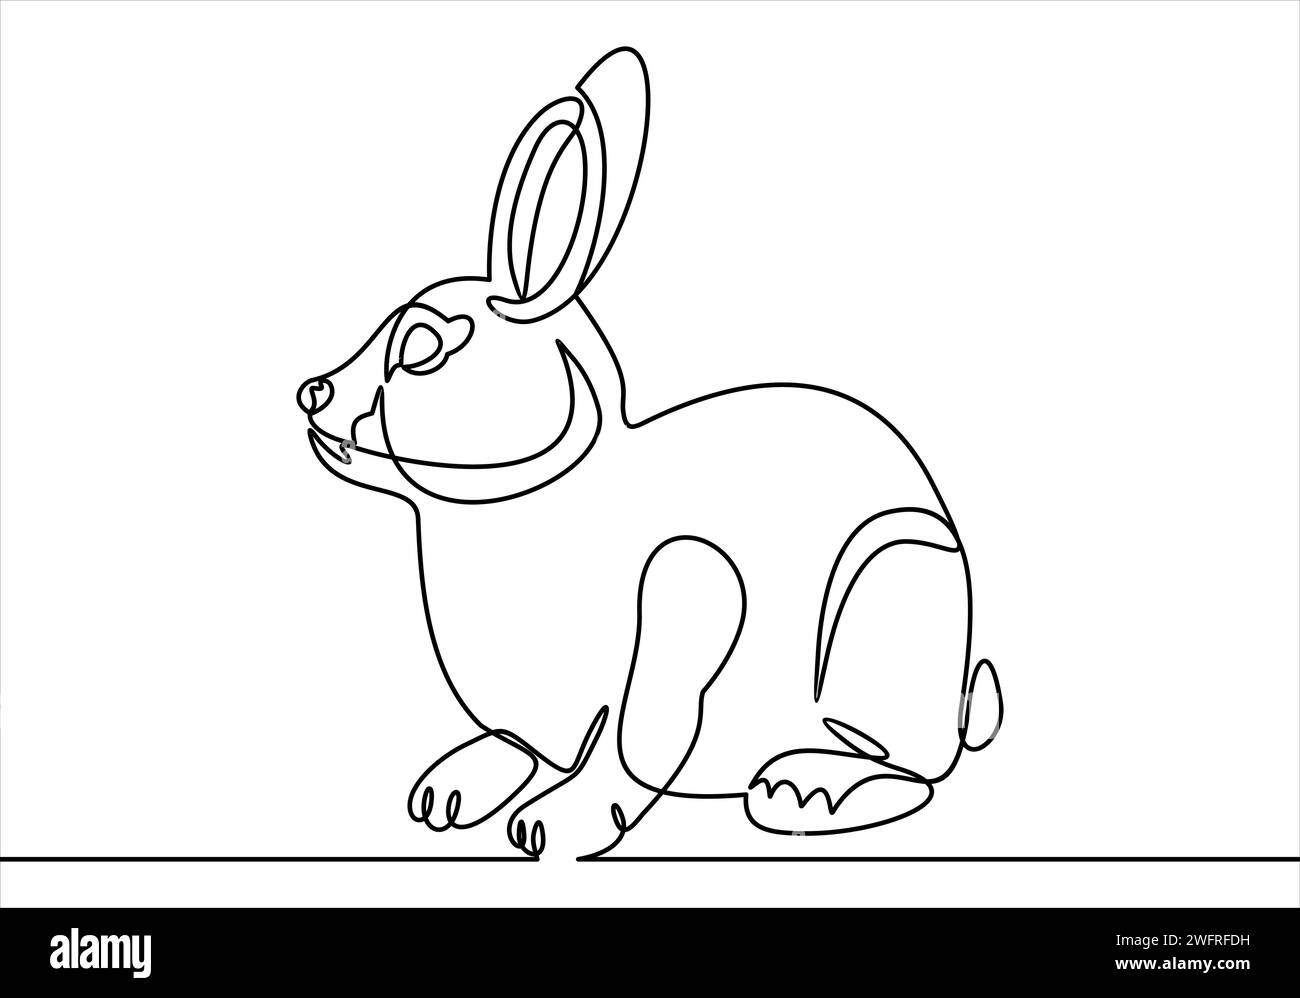 continuous line drawing of cute rabbit vector illustration Stock Vector ...